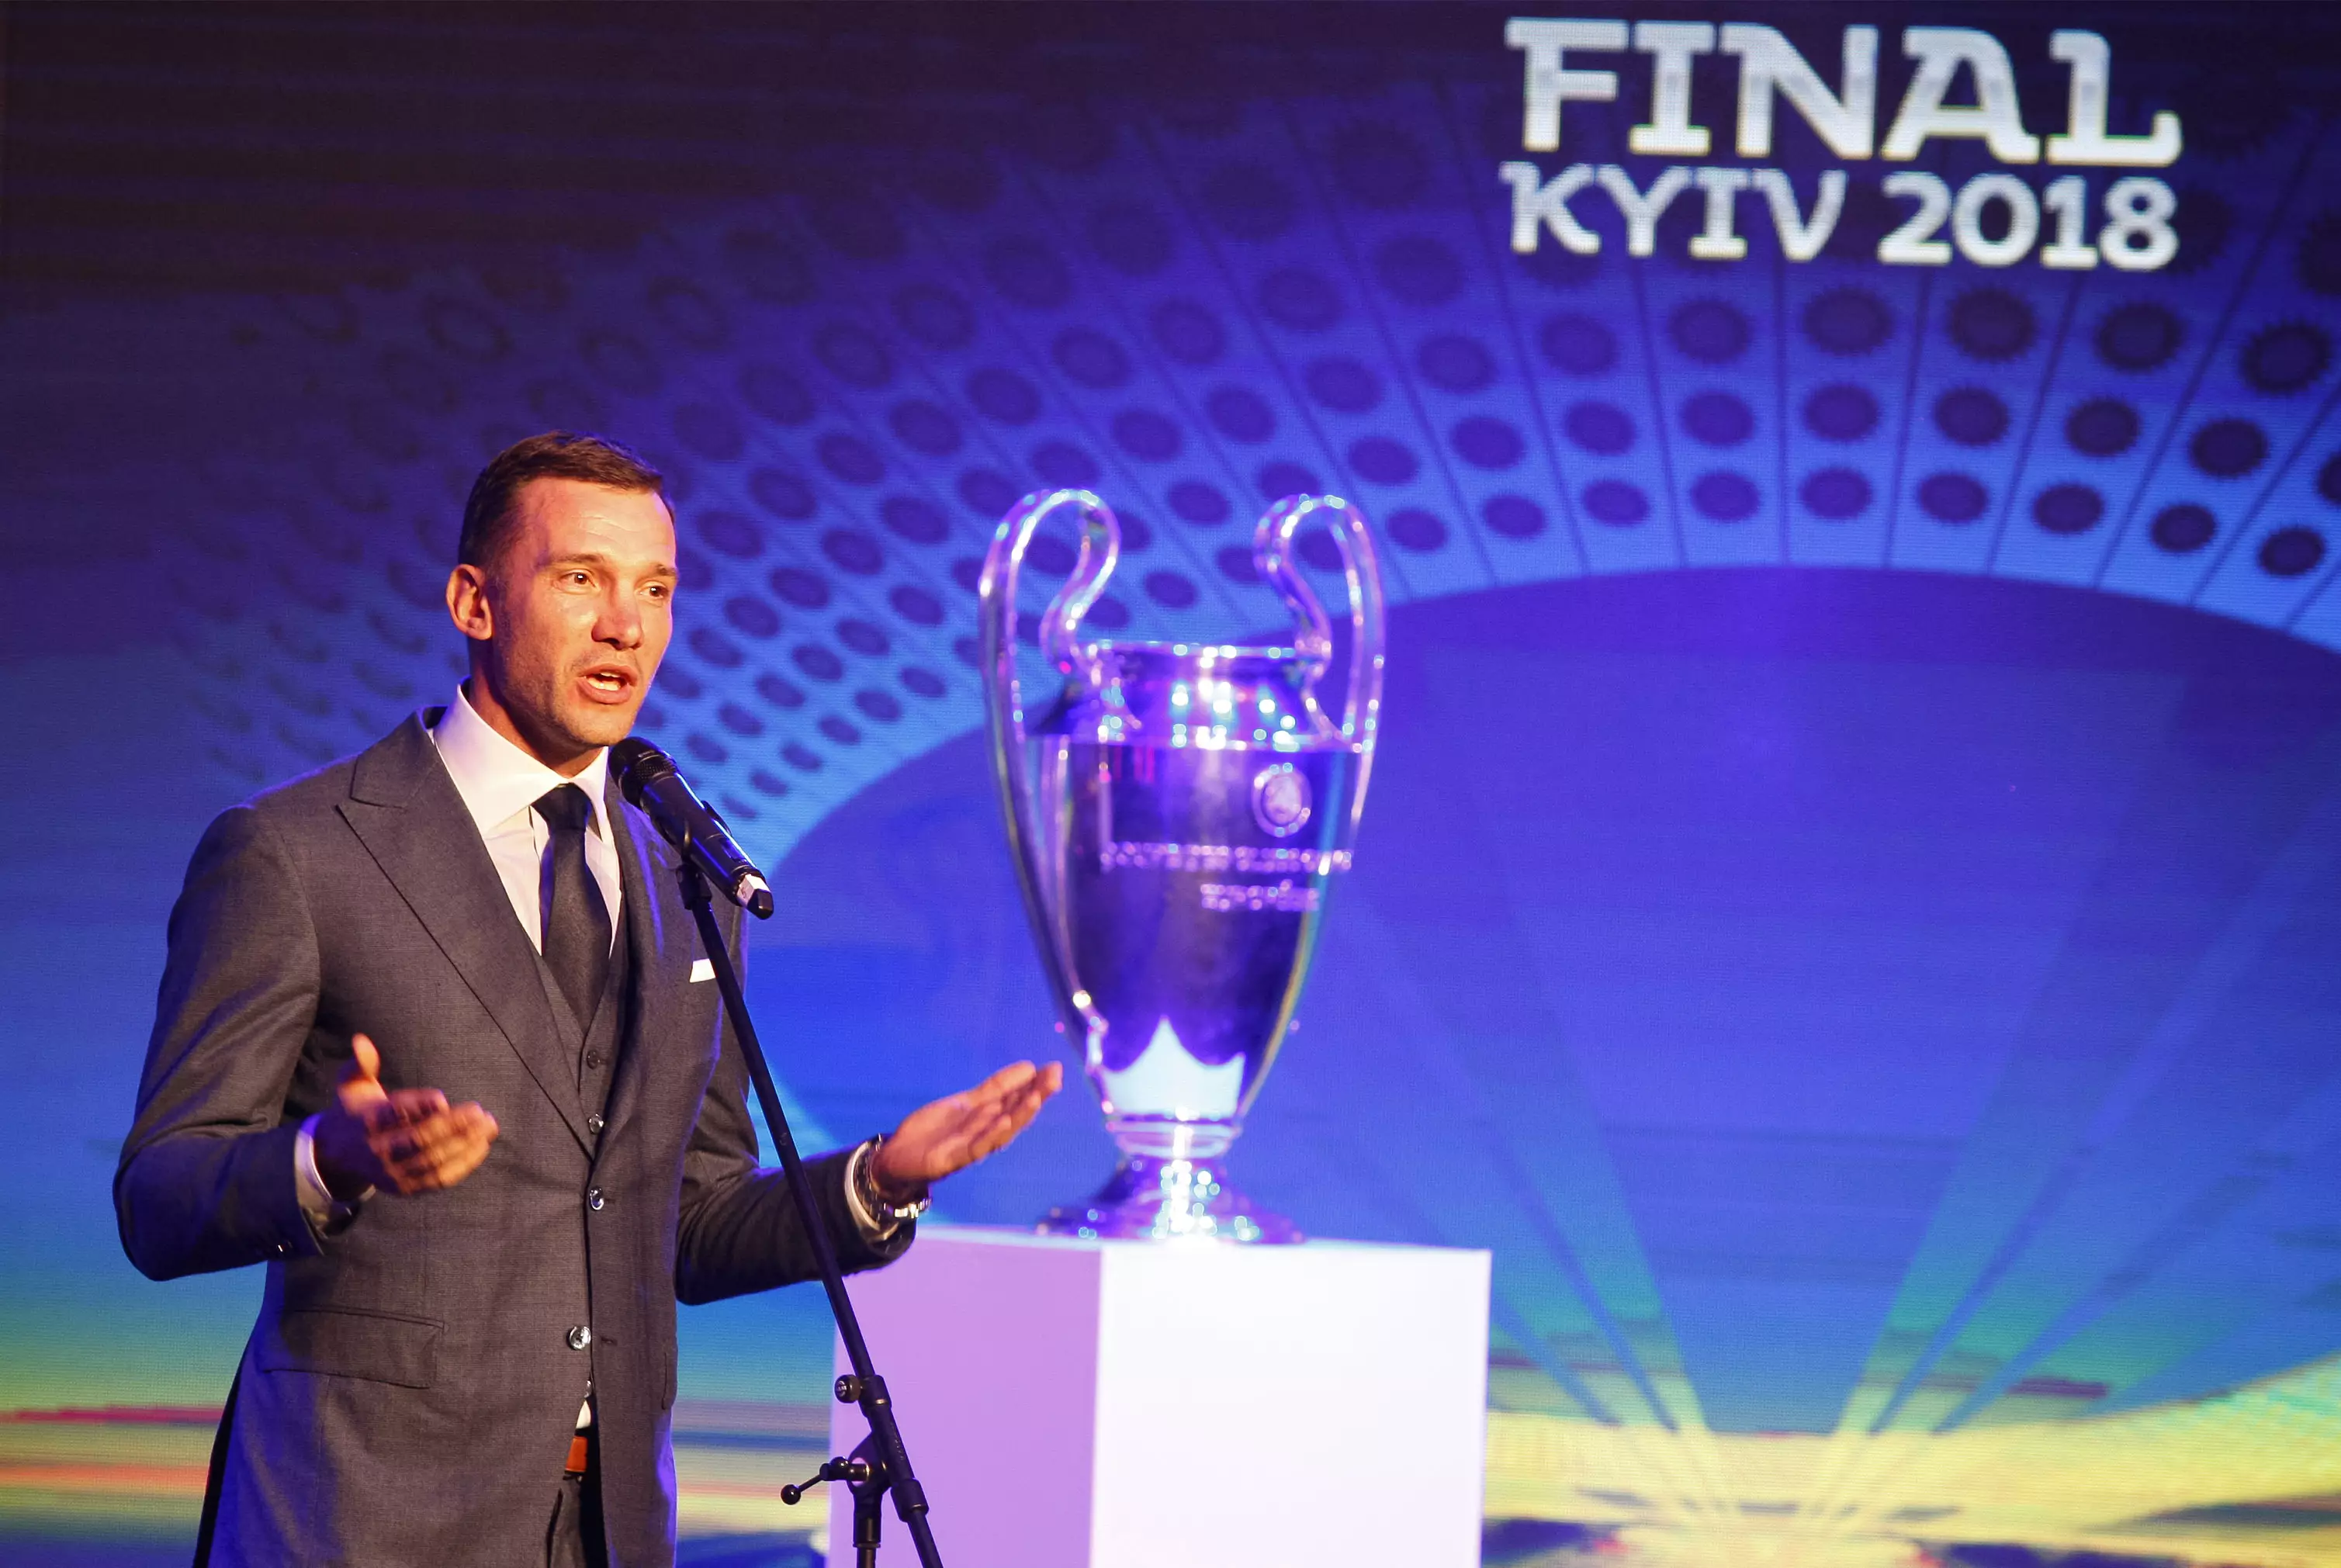 Shevchenko speaks during a presentation for UEFA. Image: PA